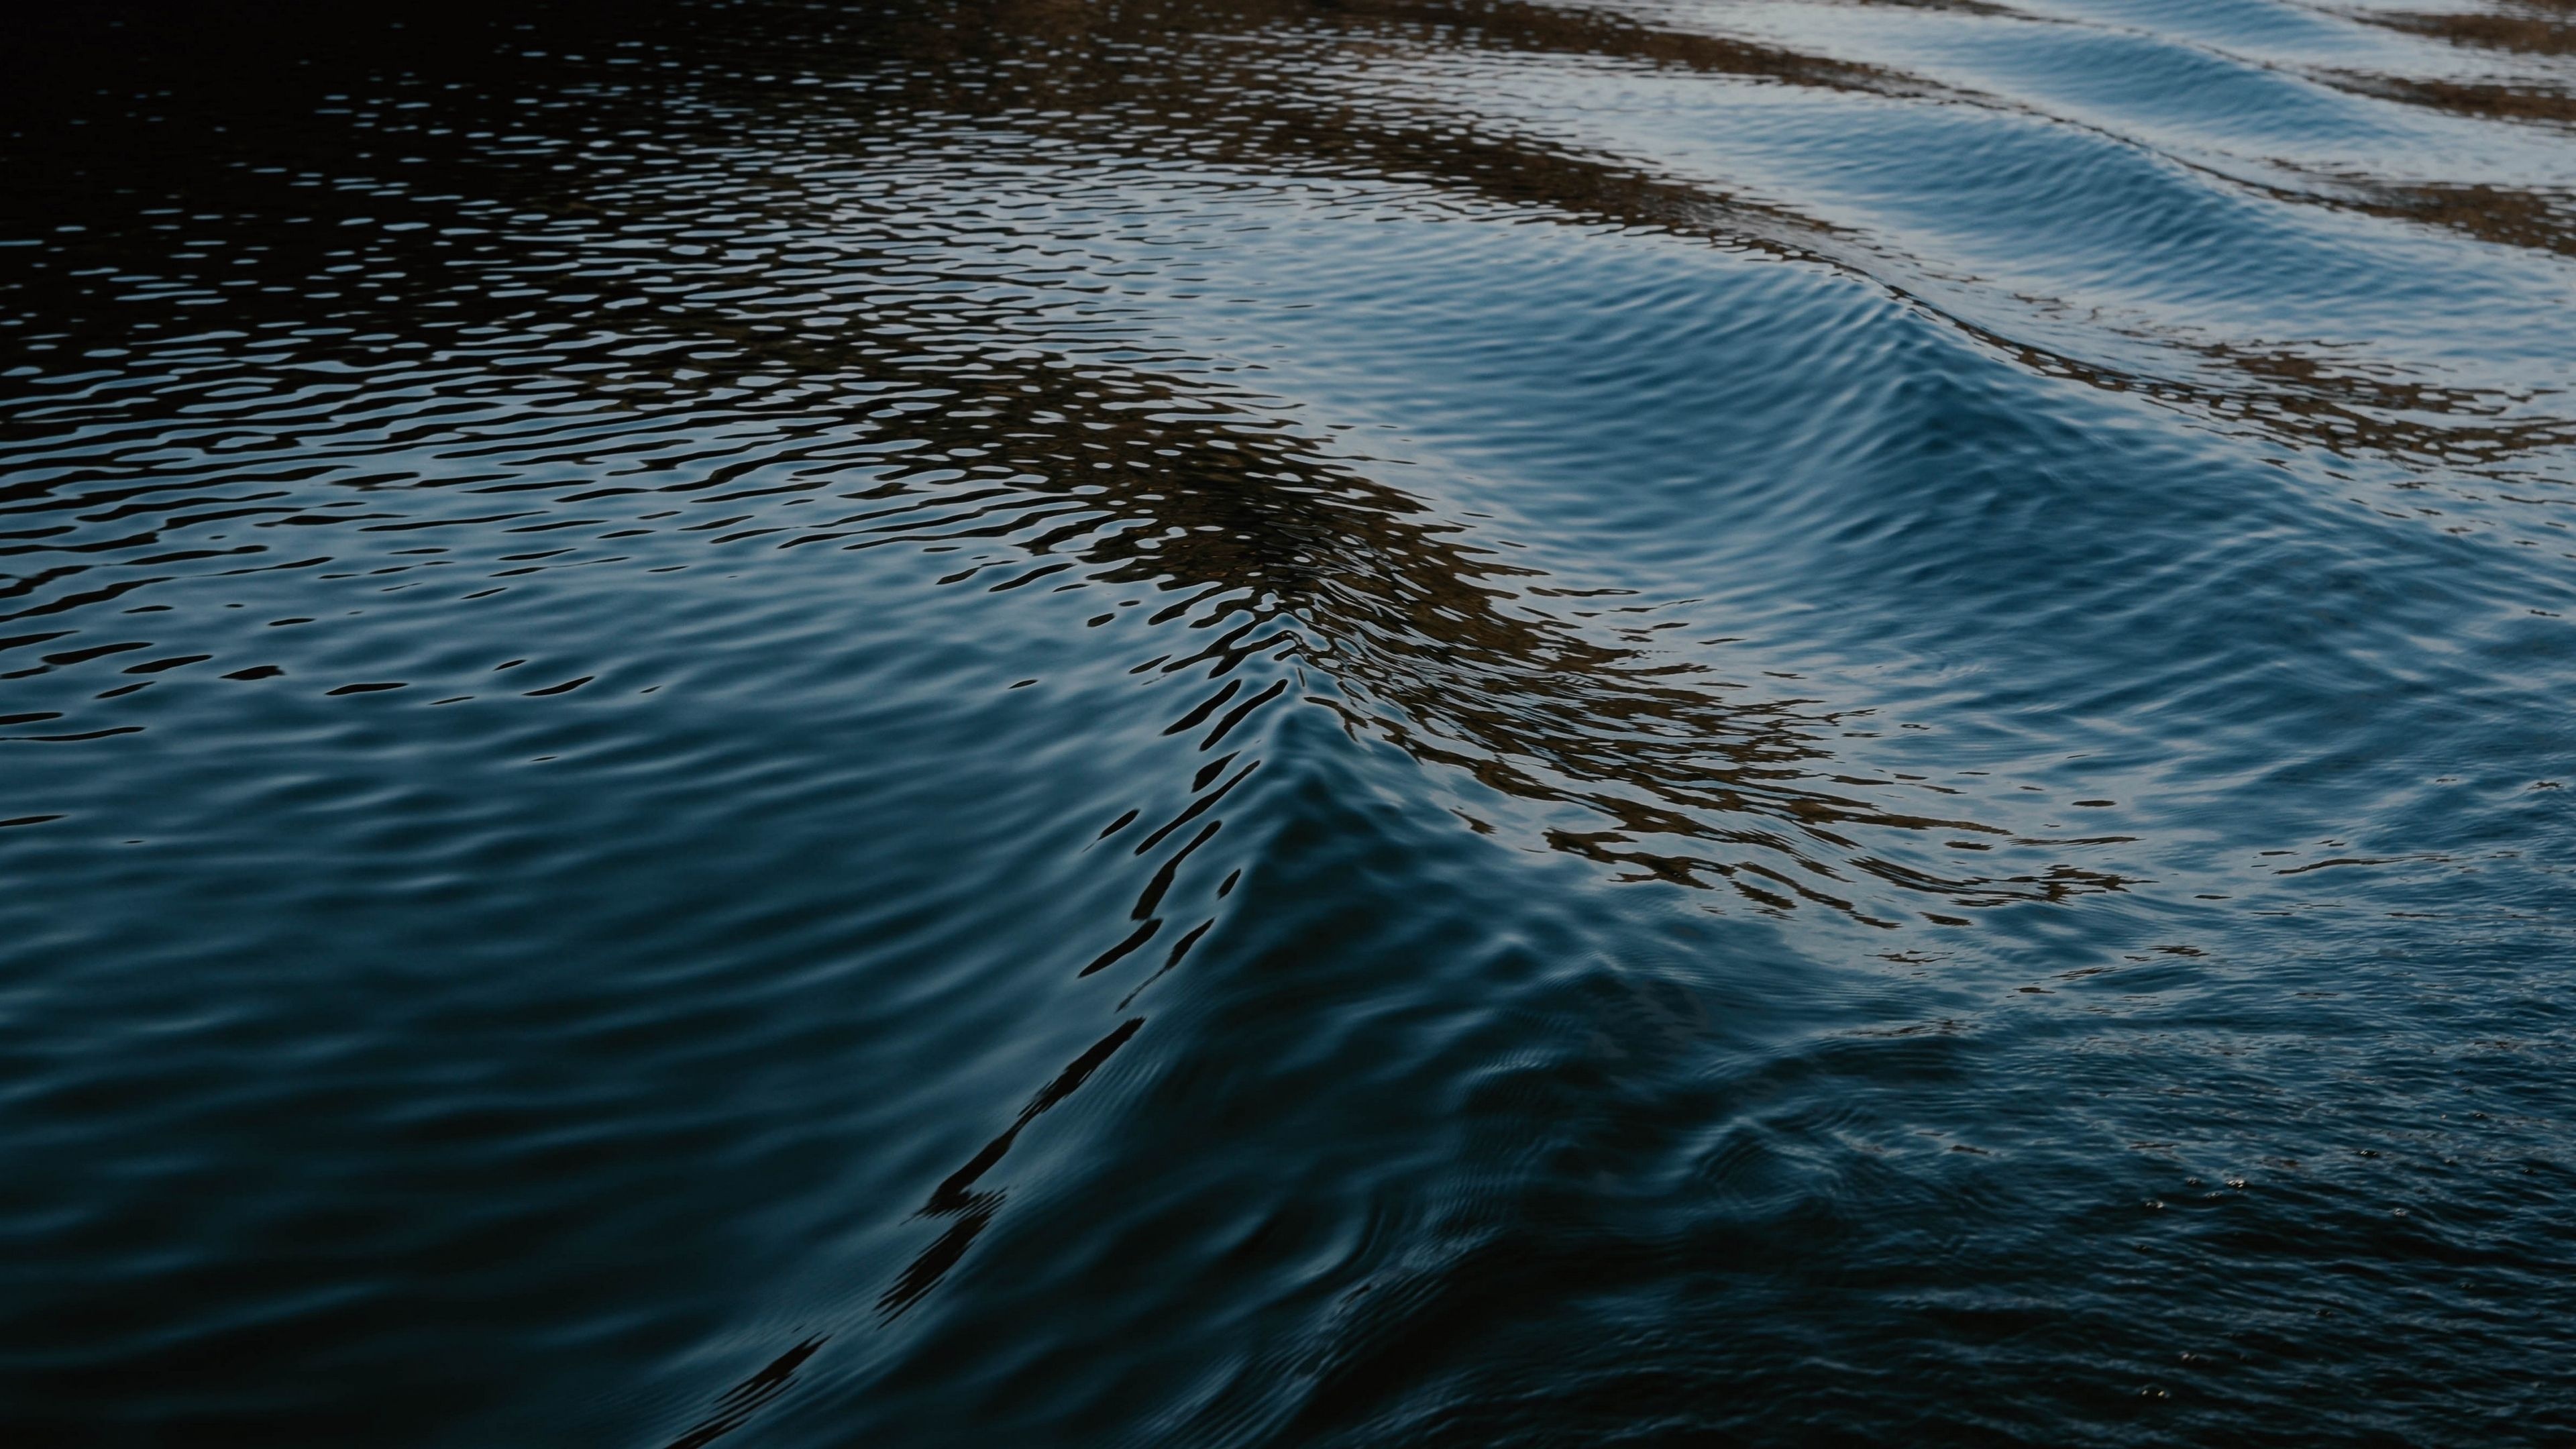 Water, Serene and tranquil, Reflective beauty, Blue skies and sparkling waves, 3840x2160 4K Desktop